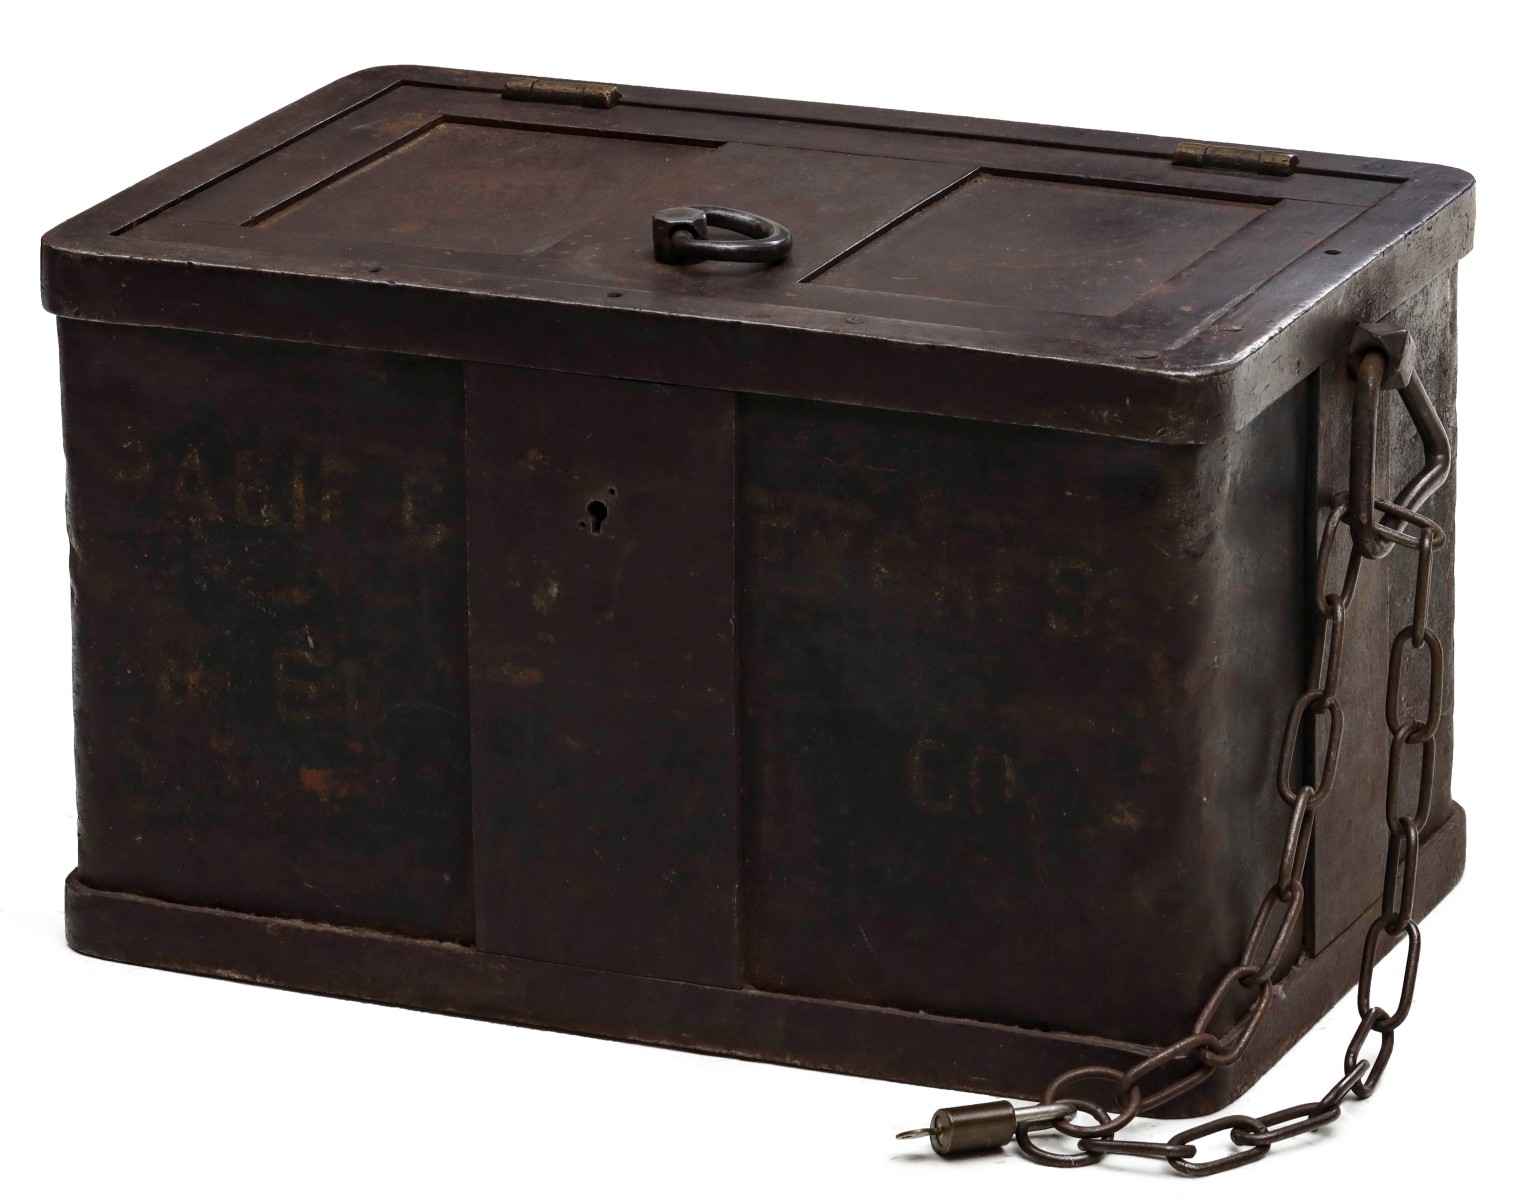 A 19TH CENTURY IRON SAFE LETTERED PACIFIC EXPRESS CO